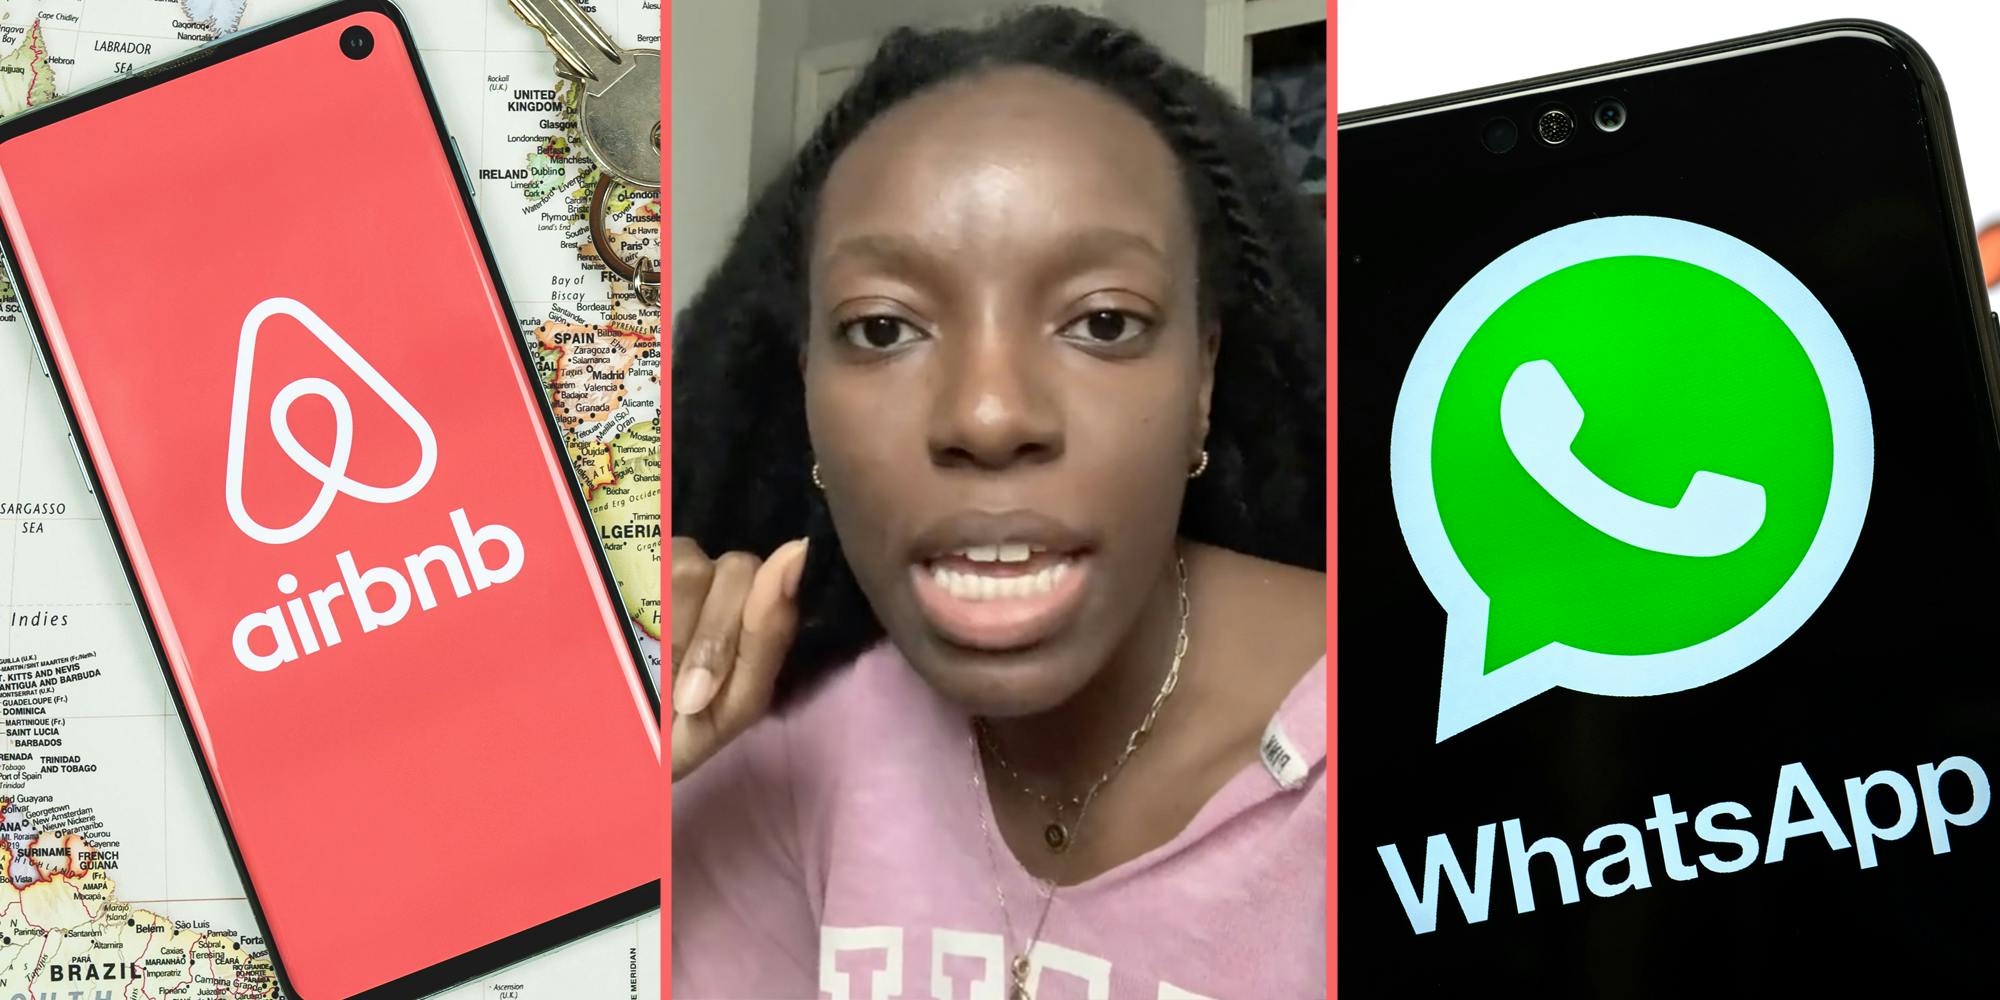 Phone with airbnb app(l), Woman talking(c), WhatsApp on phone(r)